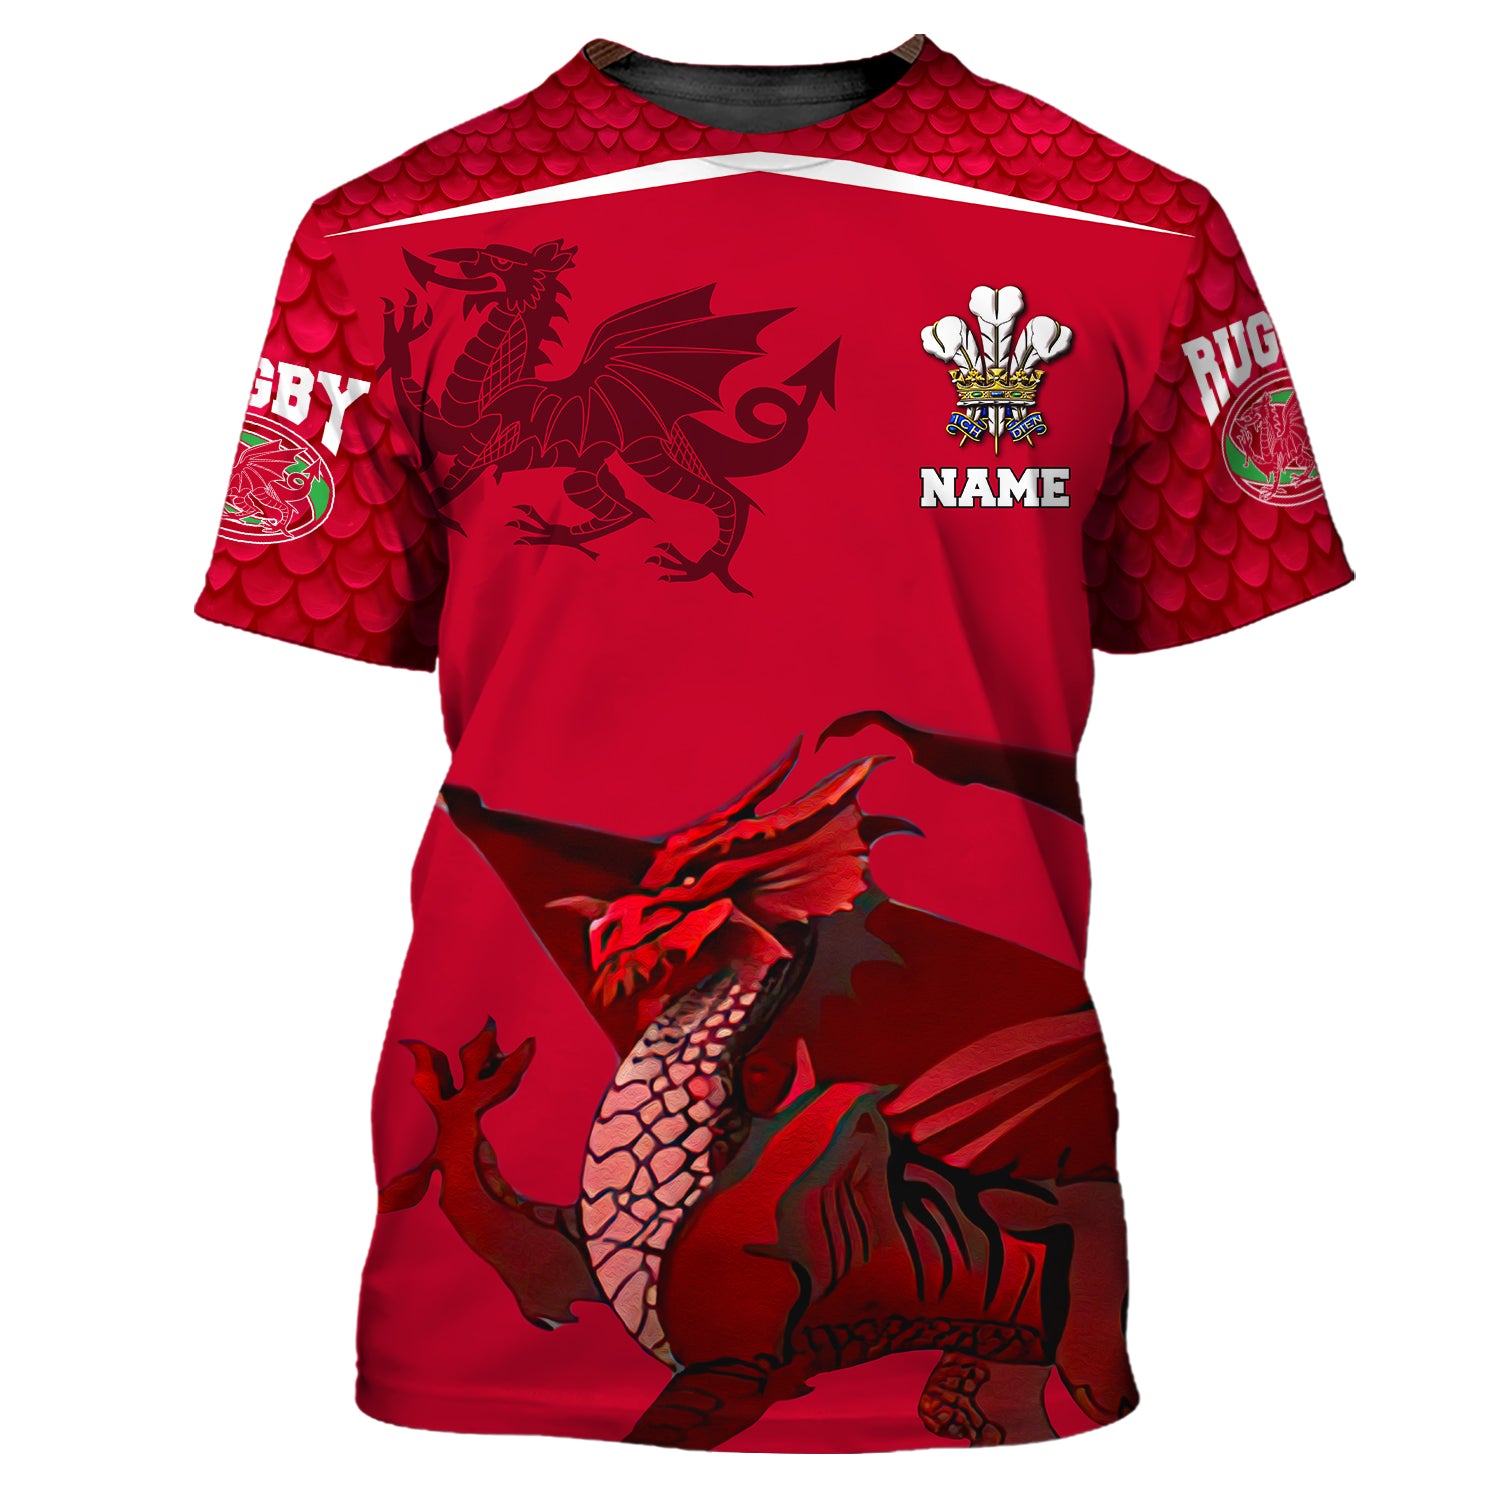 WALES RUGBY - RED DRAGON- Personalized Name 3D T Shirt - T2k- 551